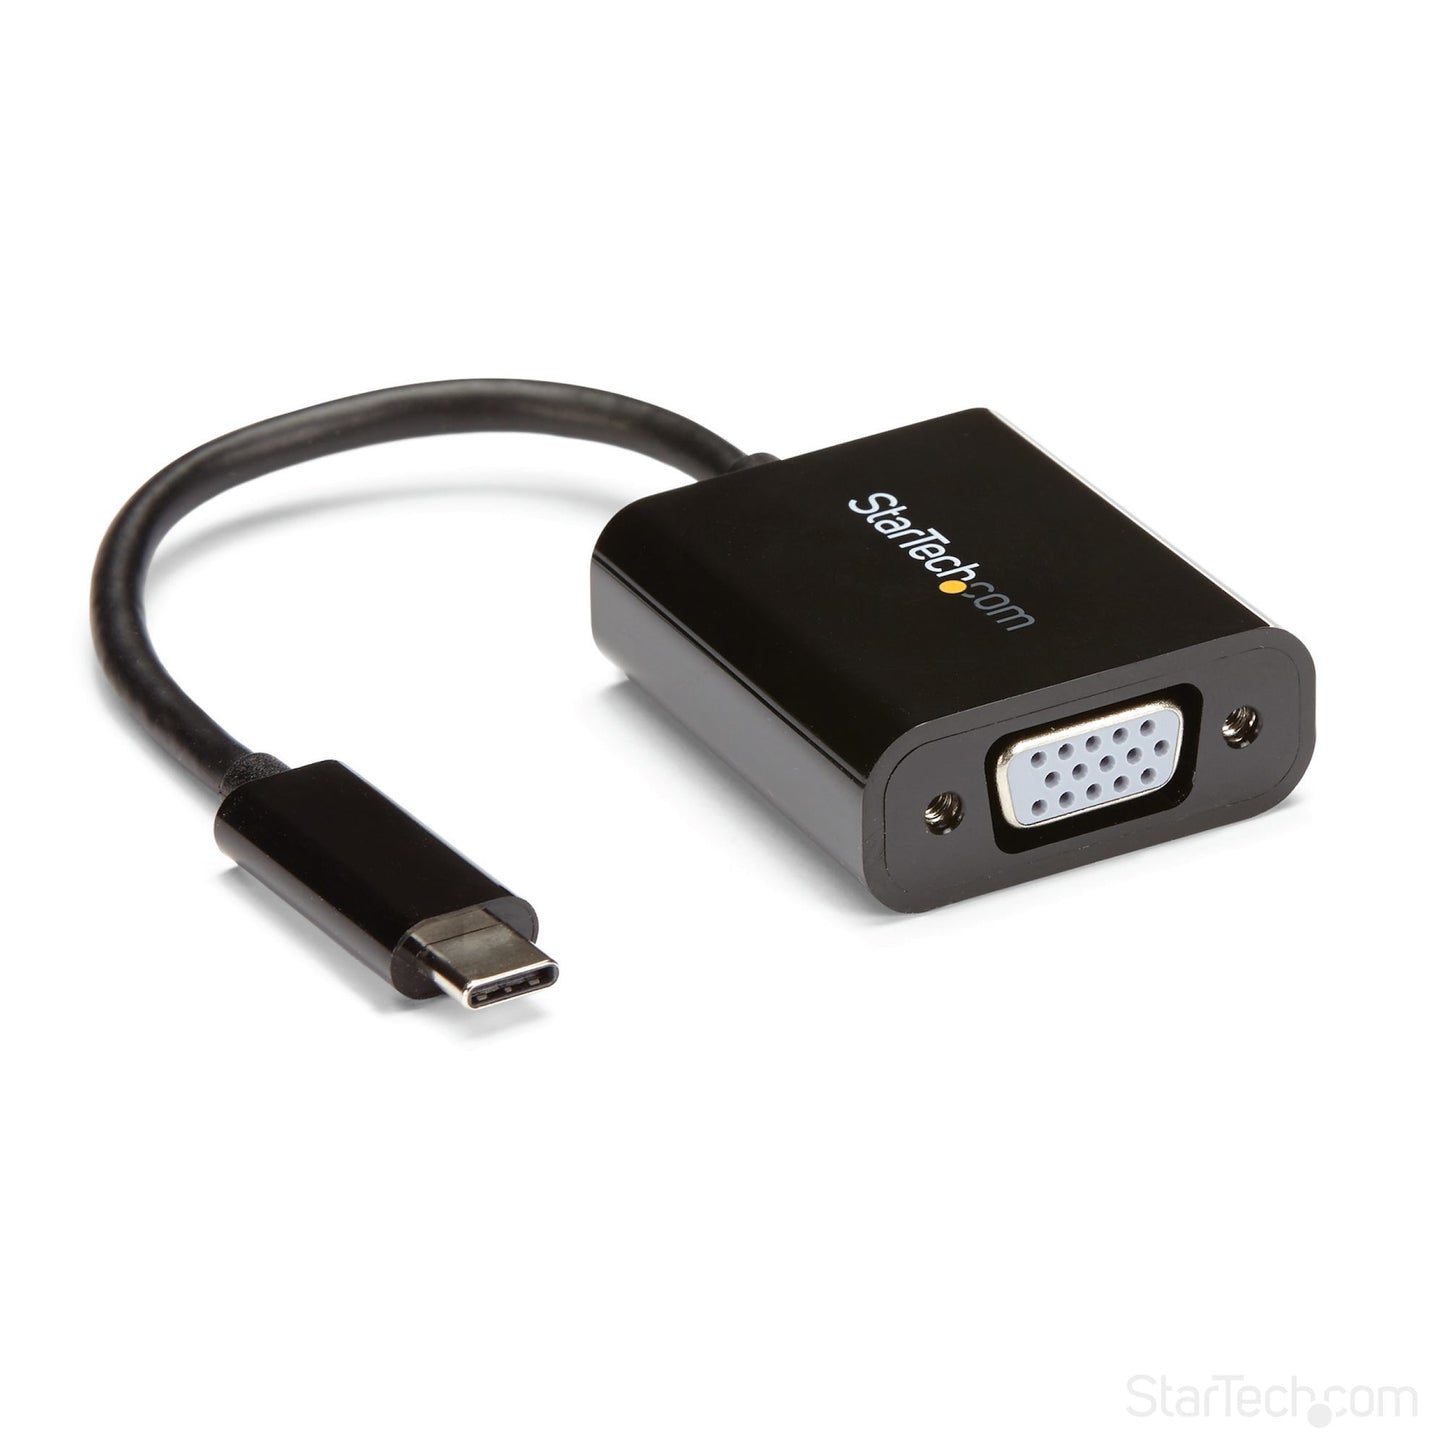 StarTech.com USB-C to VGA Adapter - Black - 1080p - Video Converter For Your MacBook Pro - USB C to VGA Display Dongle - Upgraded Version is CDP2VGAEC-0